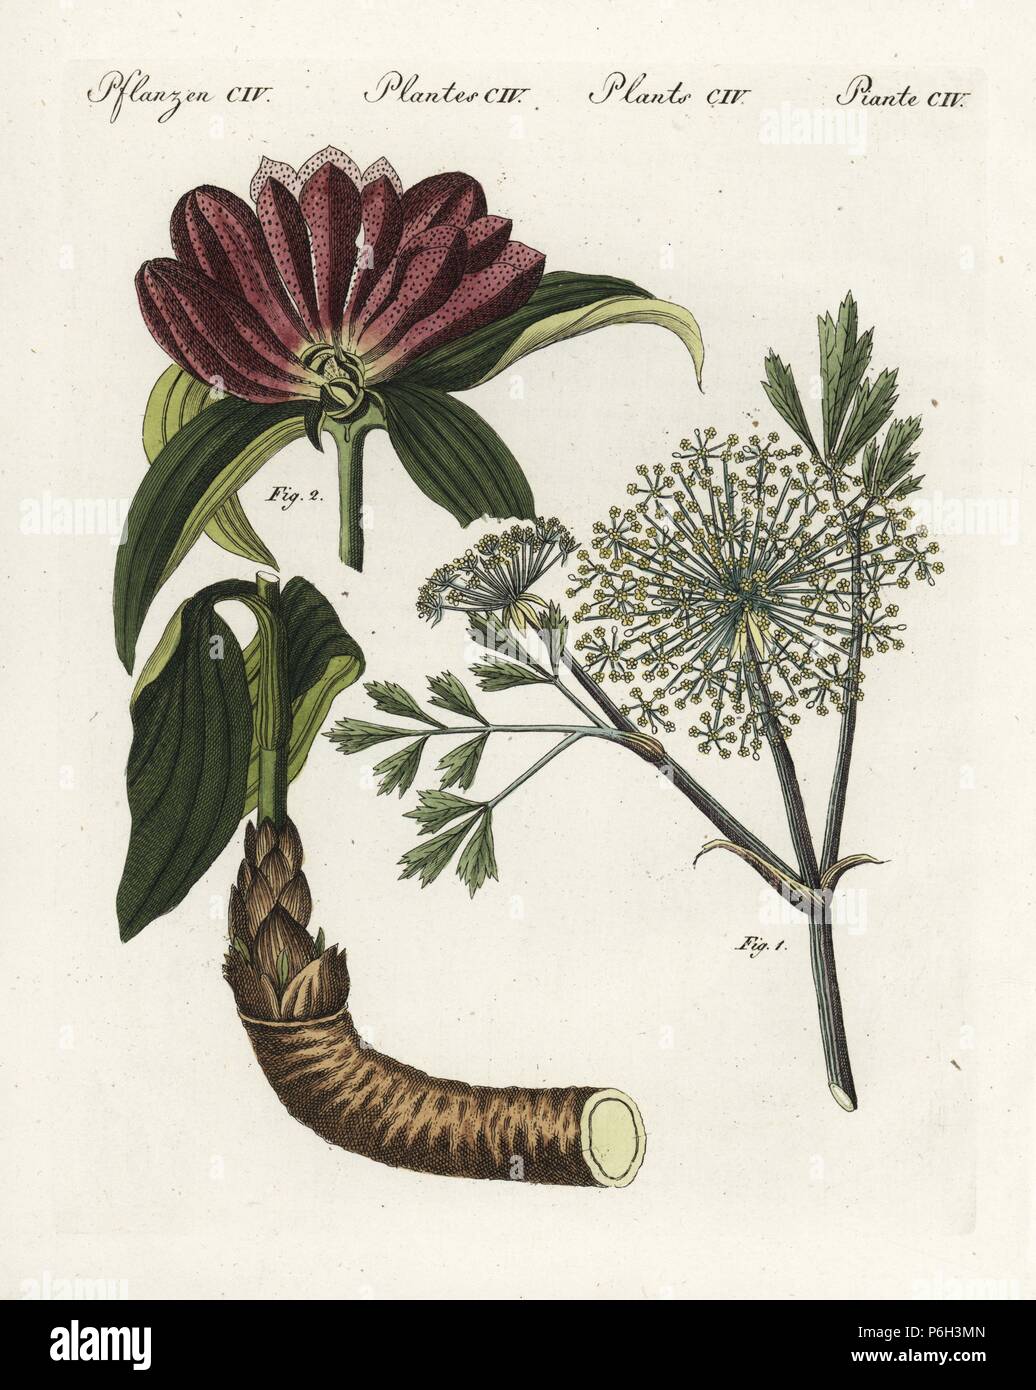 Galbanum, Ferula galbanum 1, and Hungarian gentian, Gentiana pannonica, near threatened 2. Handcoloured copperplate engraving from Bertuch's 'Bilderbuch fur Kinder' (Picture Book for Children), Weimar, 1805. Friedrich Johann Bertuch (1747-1822) was a German publisher and man of arts most famous for his 12-volume encyclopedia for children illustrated with 1,200 engraved plates on natural history, science, costume, mythology, etc., published from 1790-1830. Stock Photo